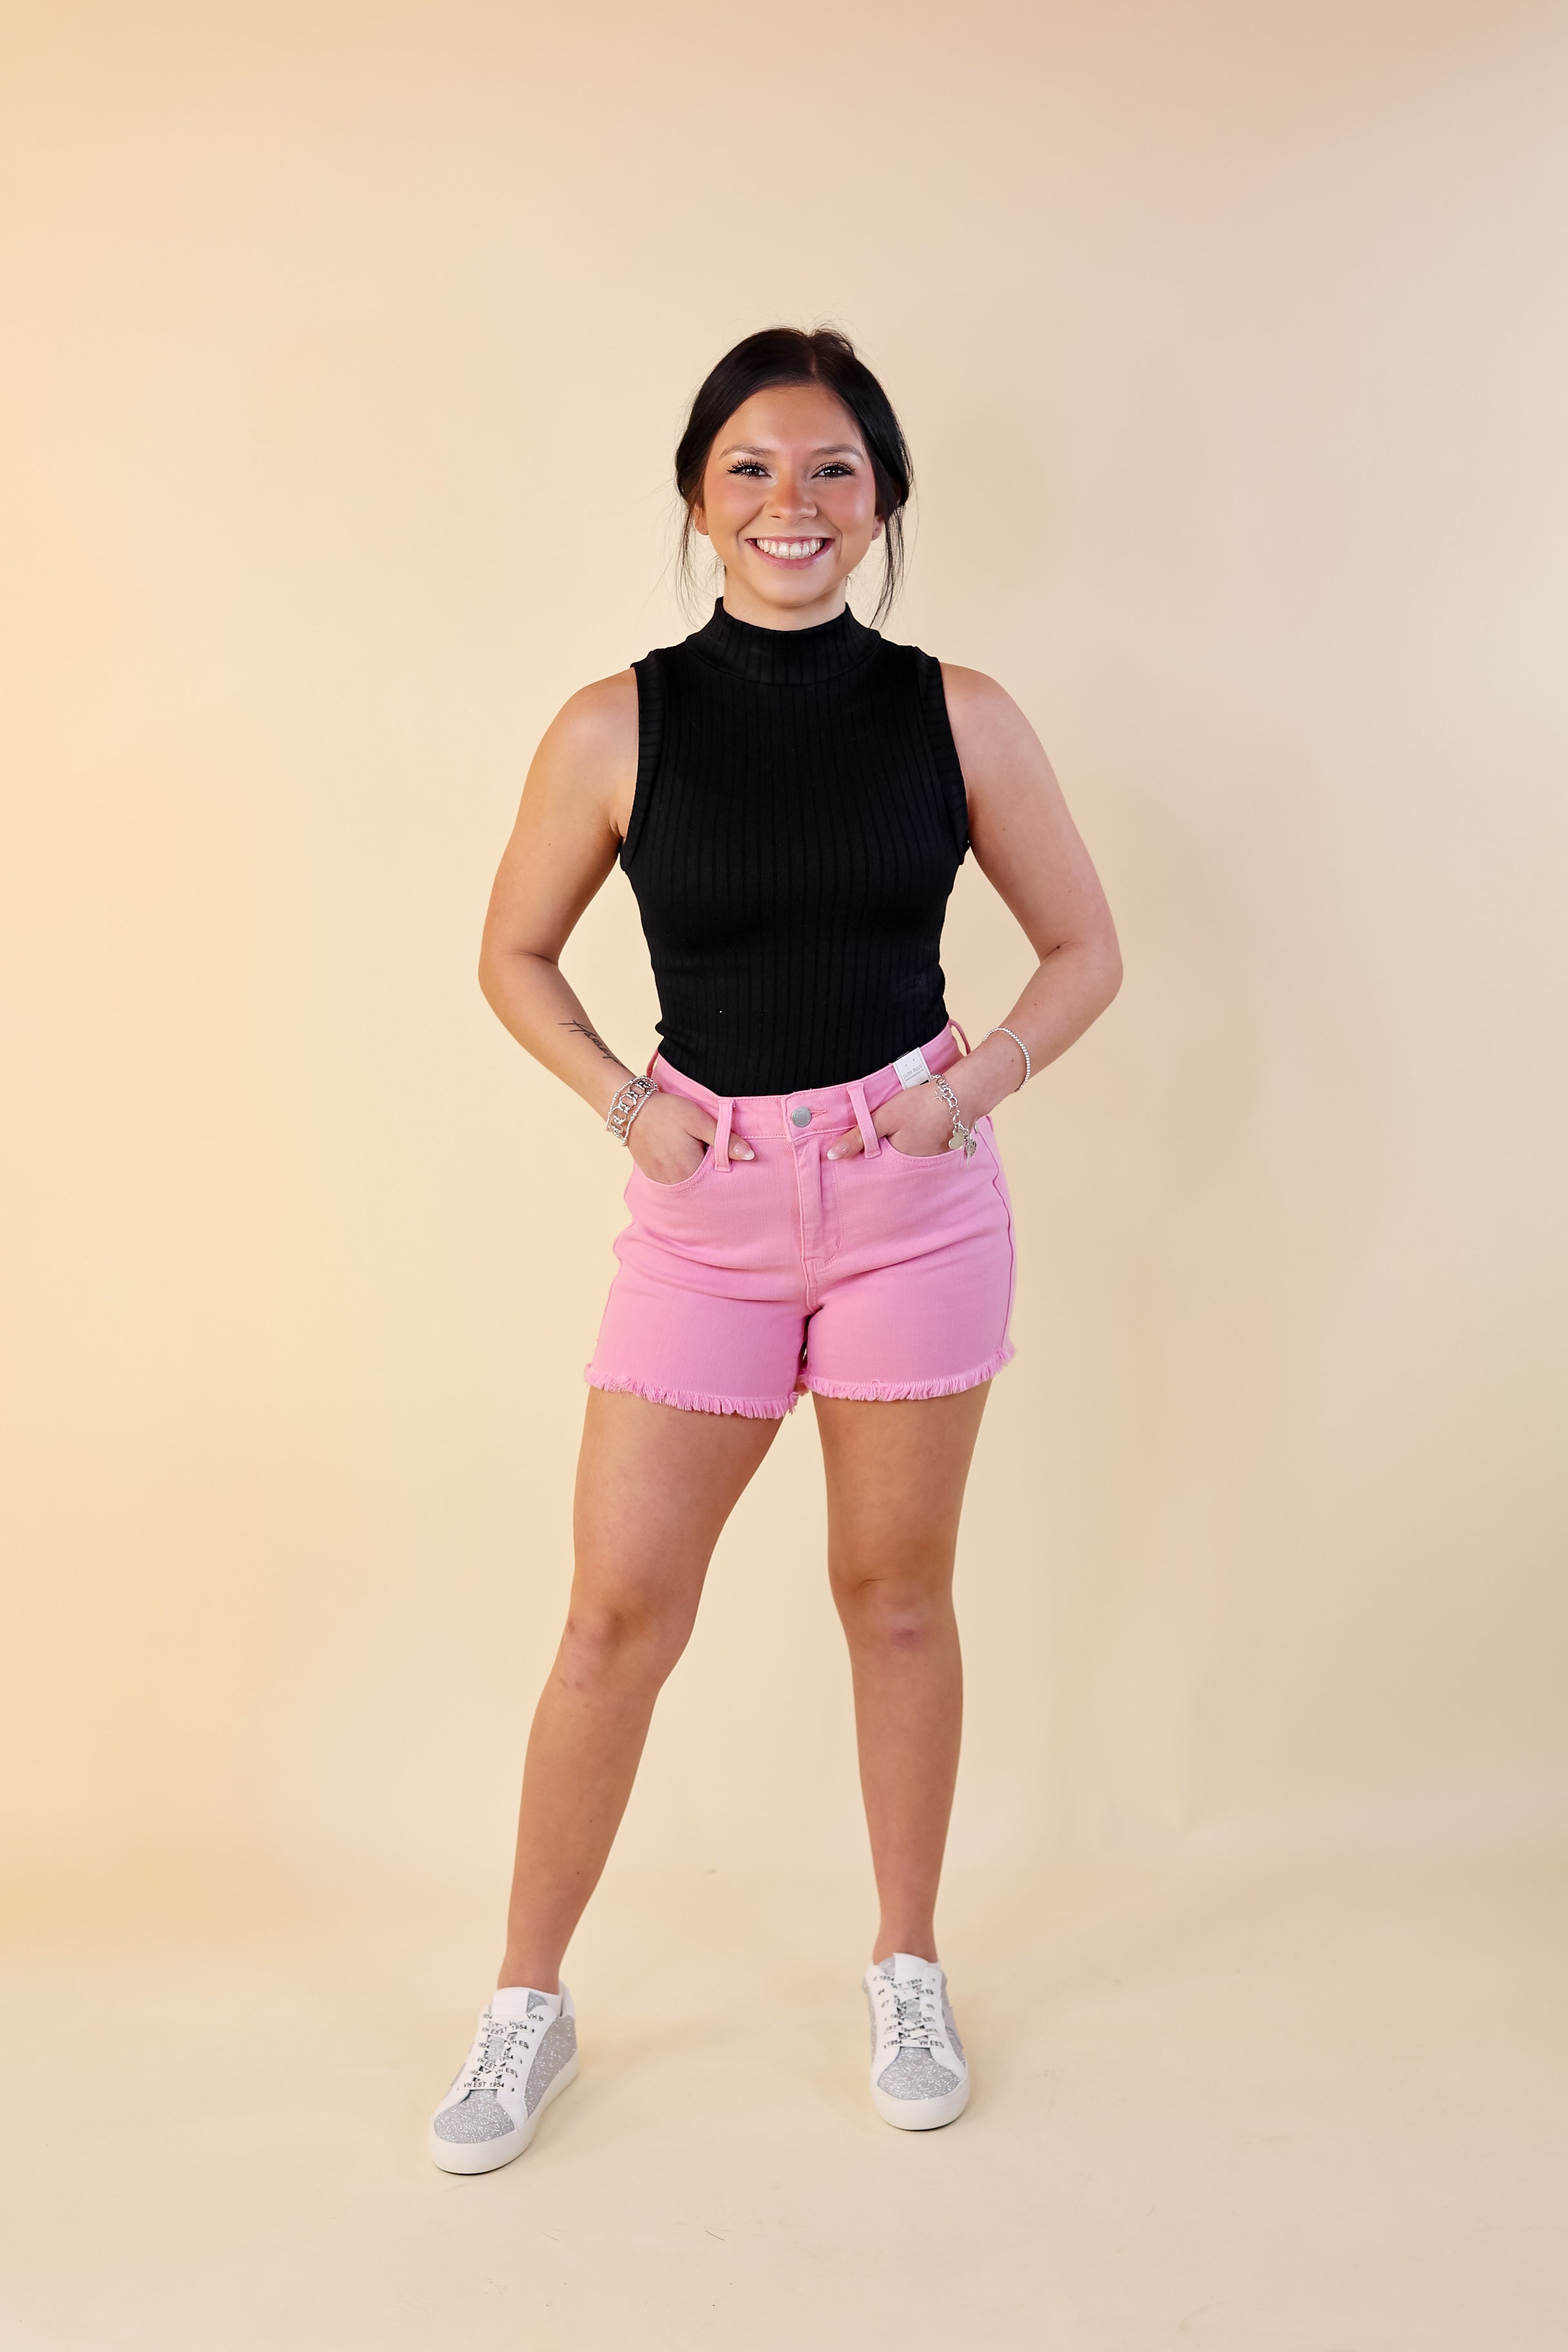 Judy Blue | Sunlight Spectrum Garment Dyed Fray Hem Shorts in Light Pink Wash - Giddy Up Glamour Boutique